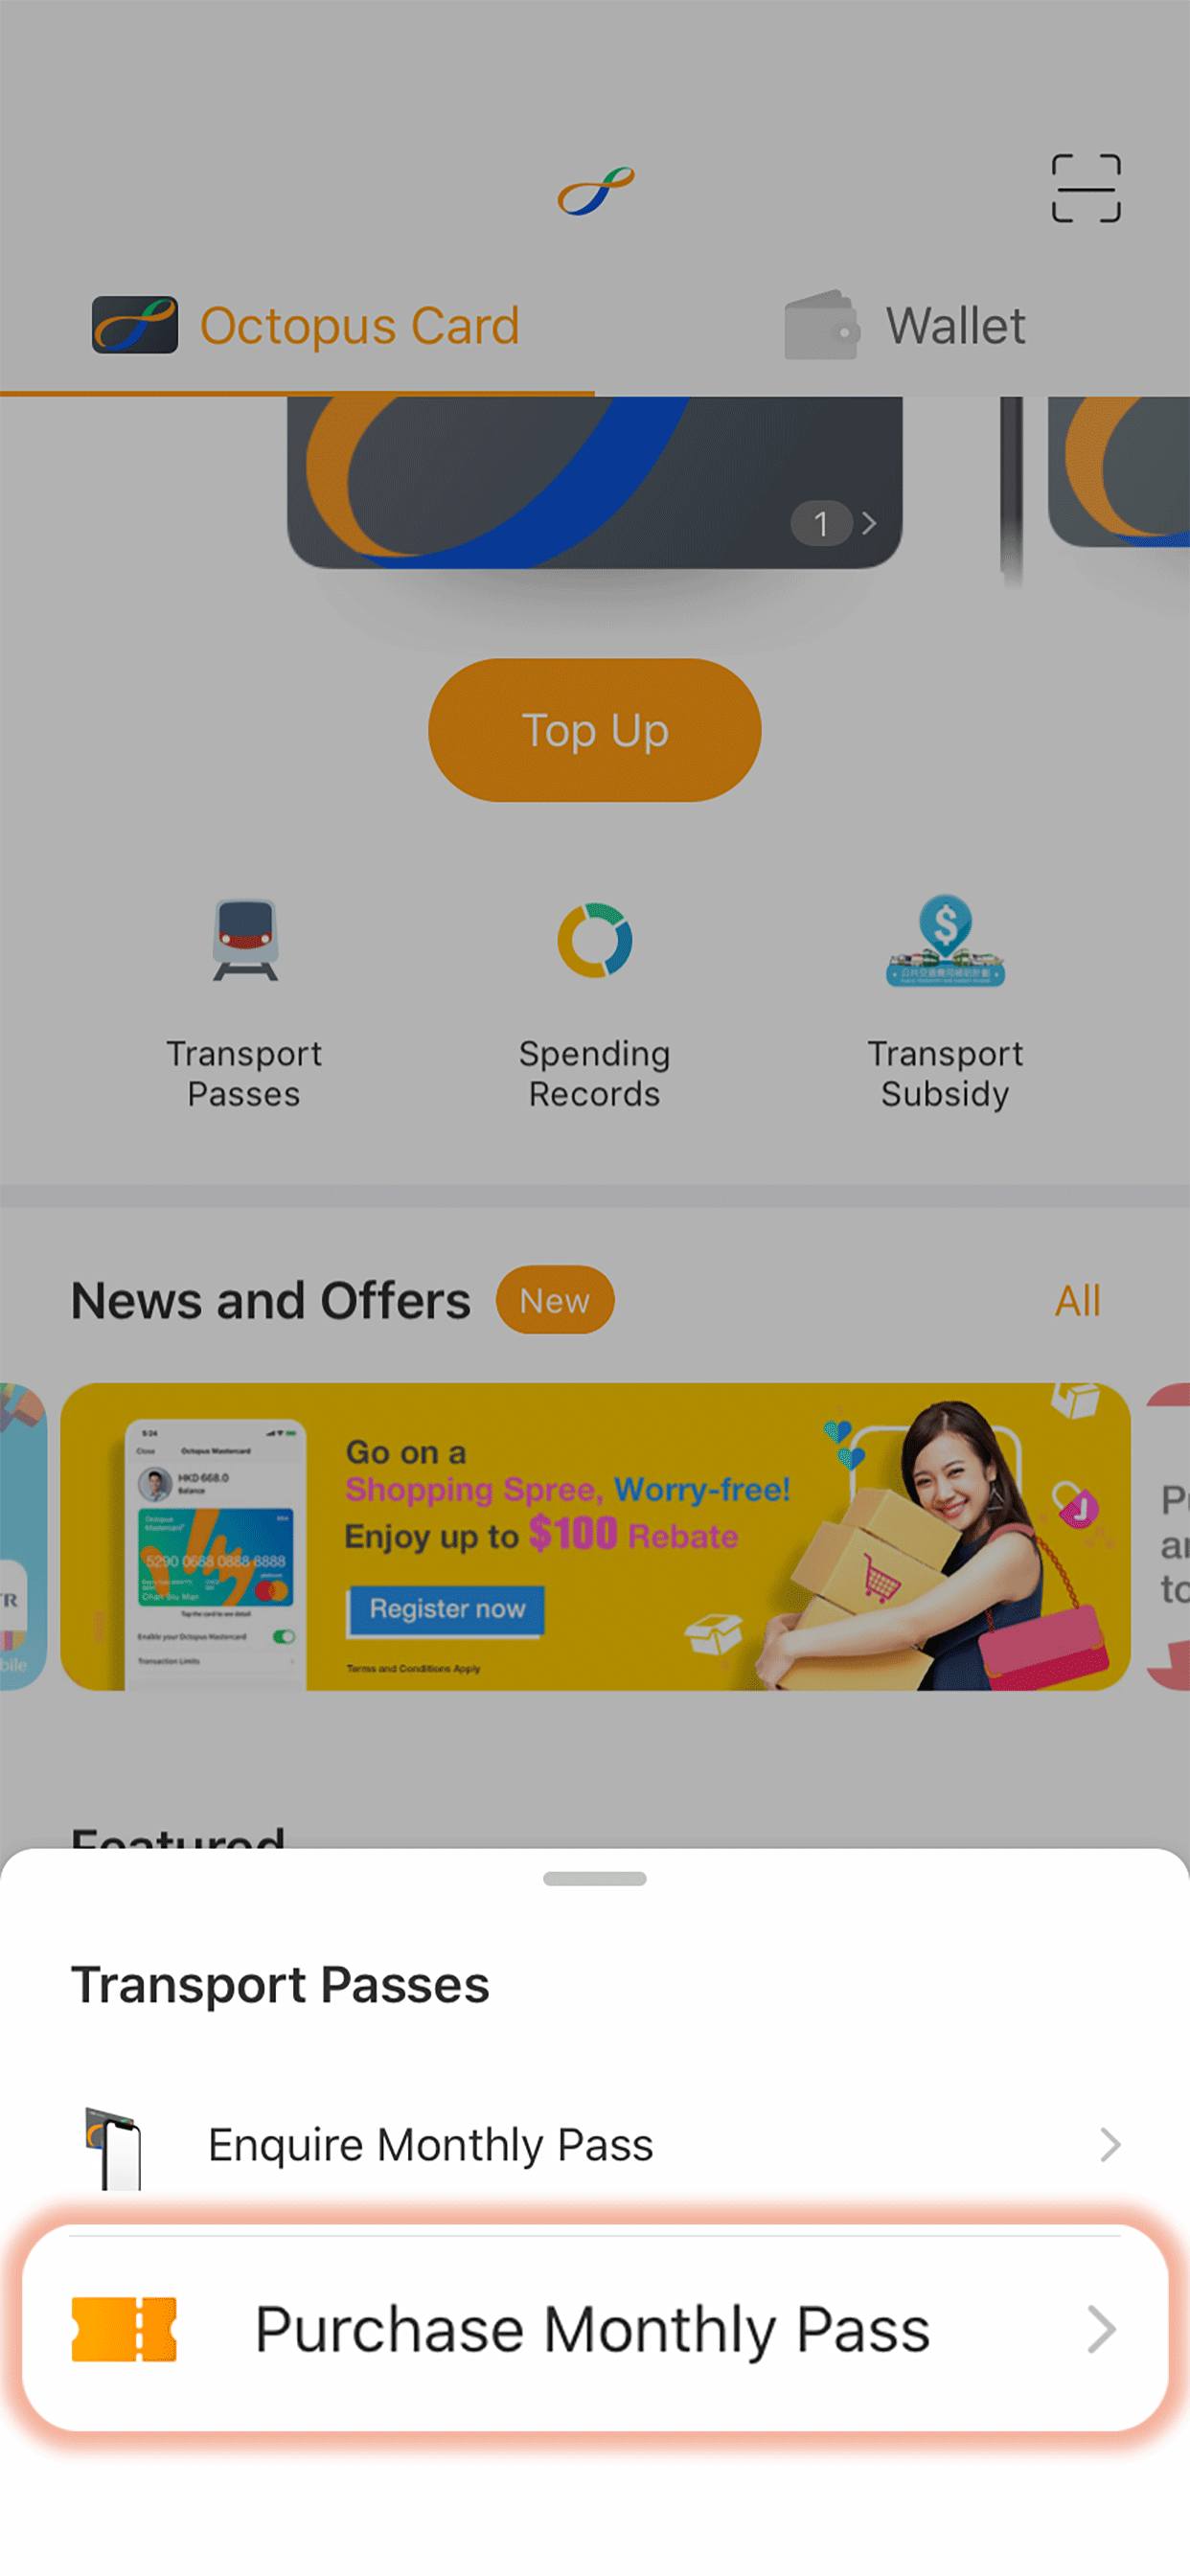 Tap 'Transport Passes' on Octopus App Homepage and select 'Purchase Monthly Pass'. Select 'MTR' and follow the steps to purchase Monthly Pass Extra